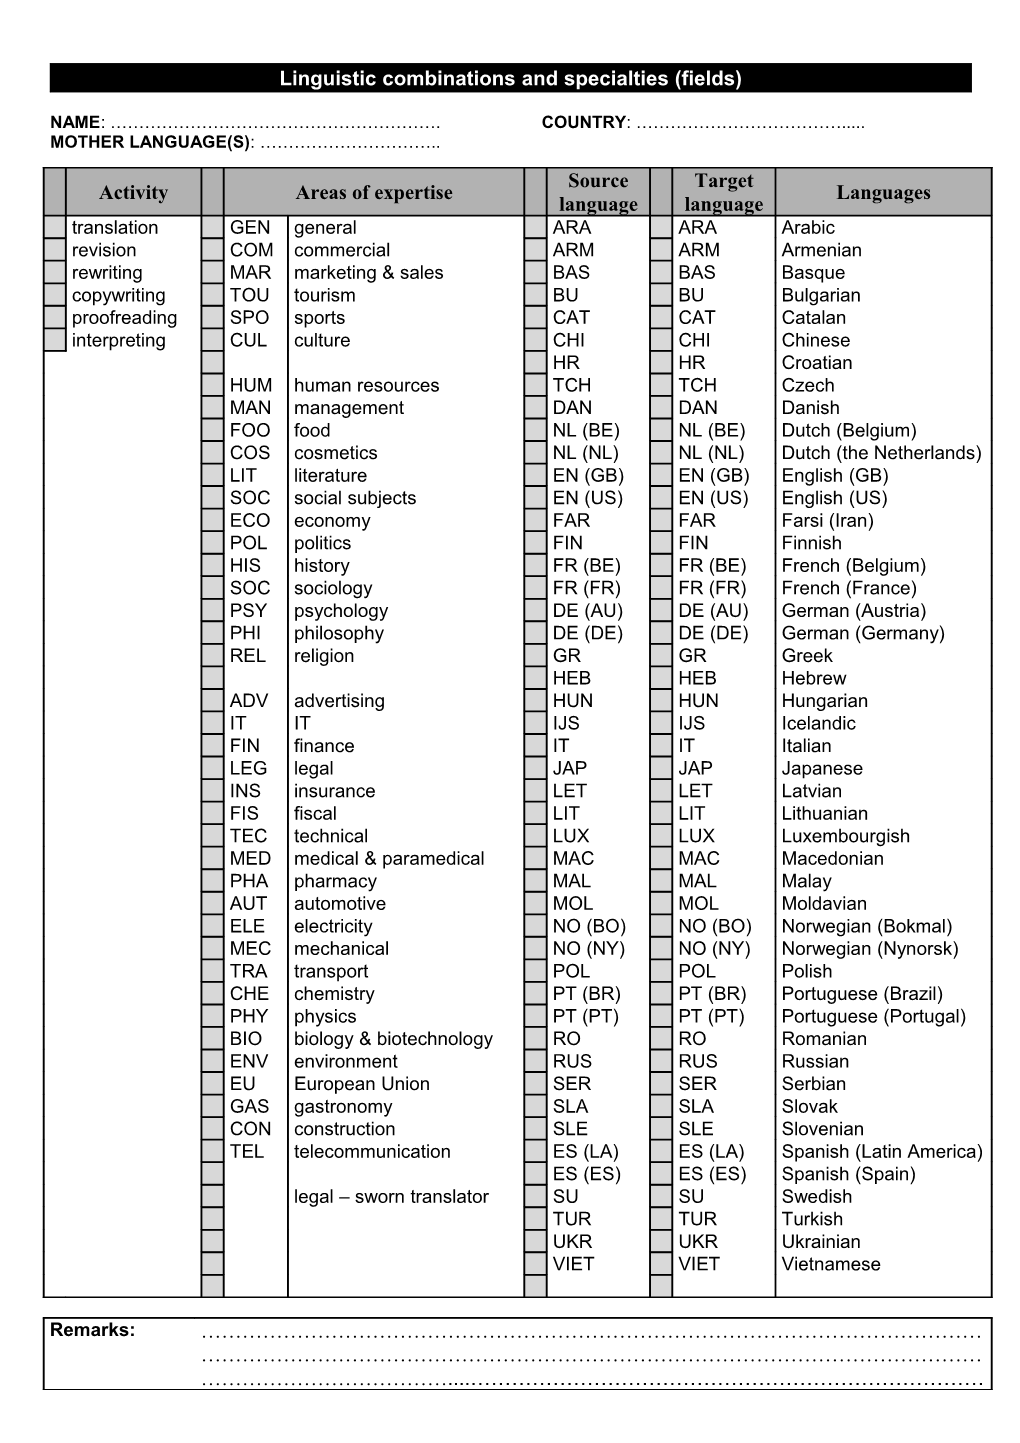 Linguistic Combinations and Specialties (Fields)